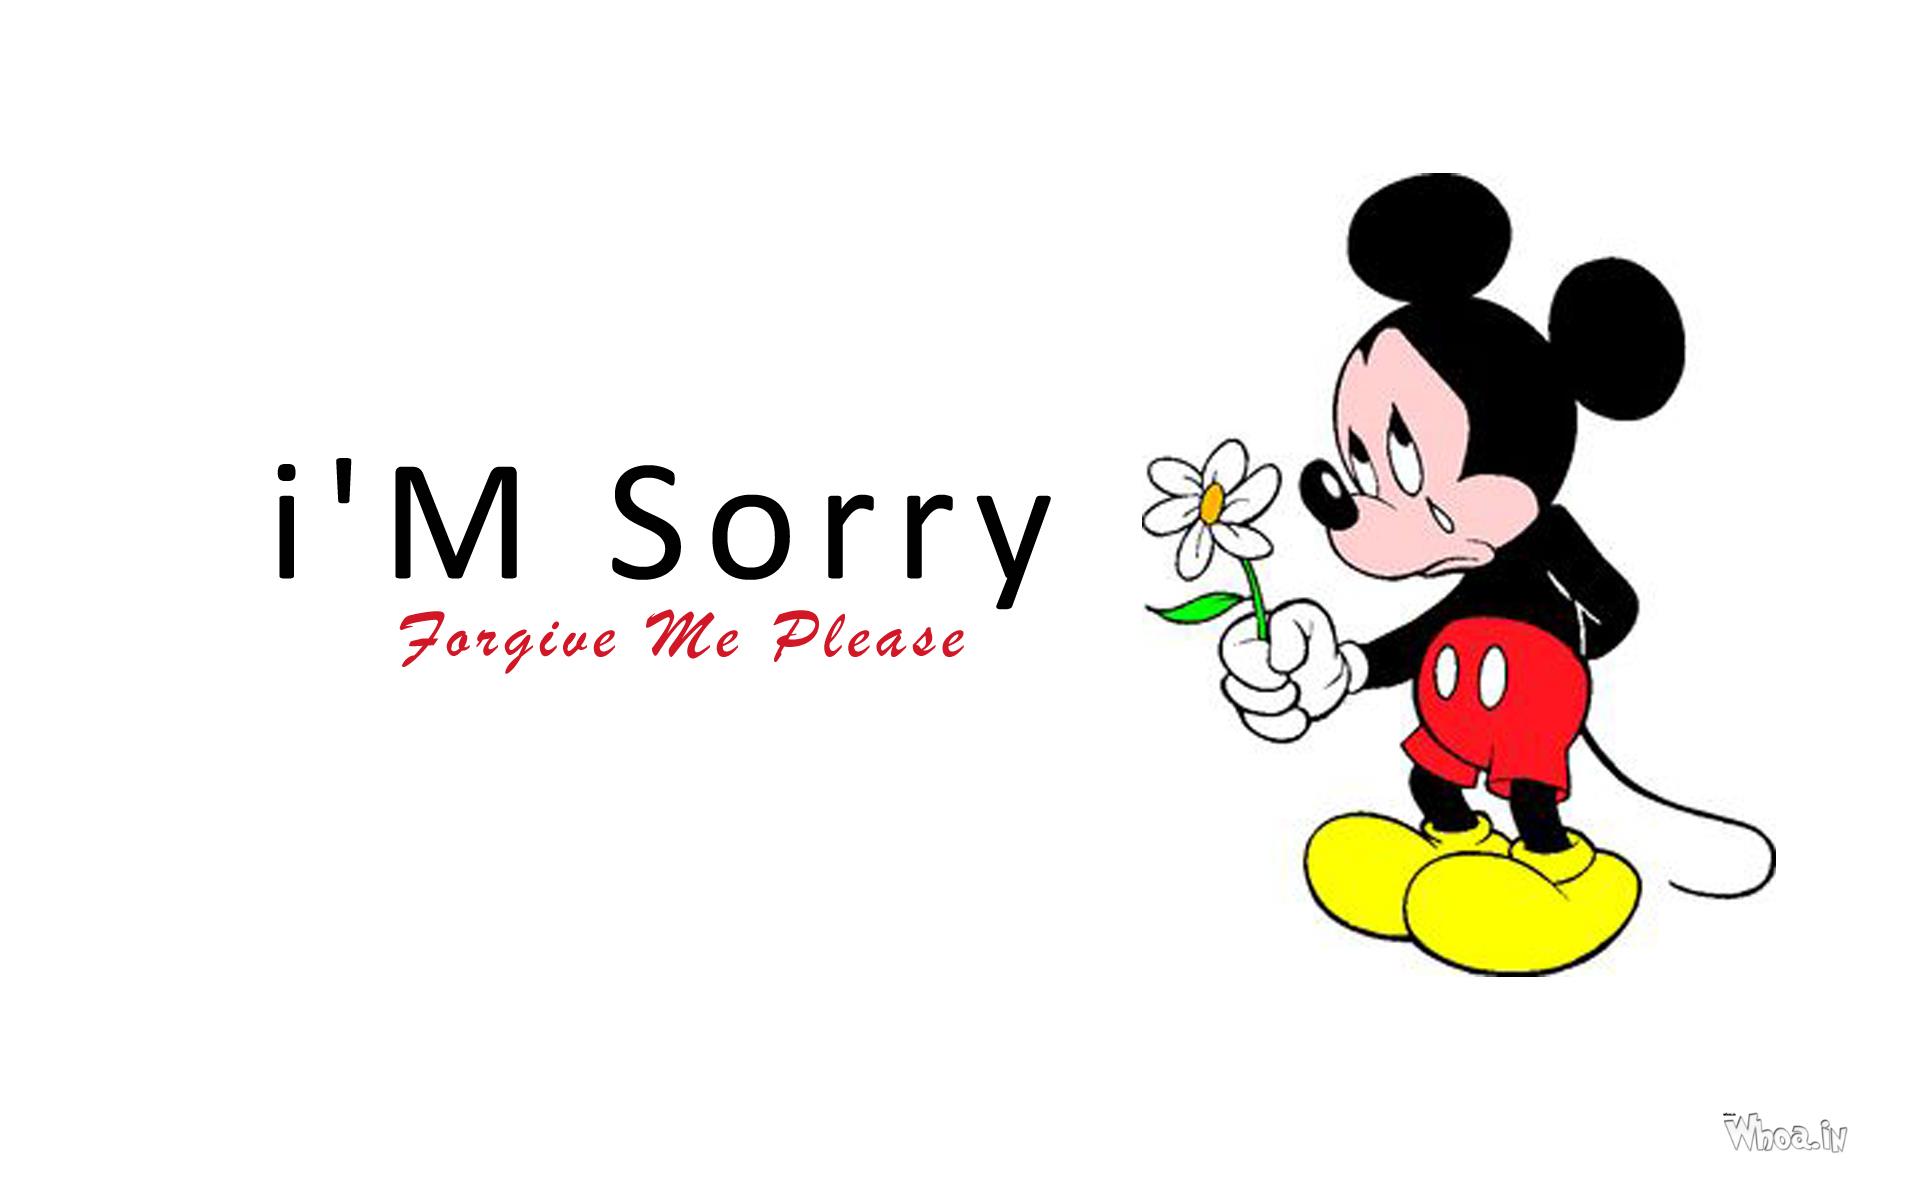 Sad Sorry HD Wallpaper Image Amp Pictures Becuo